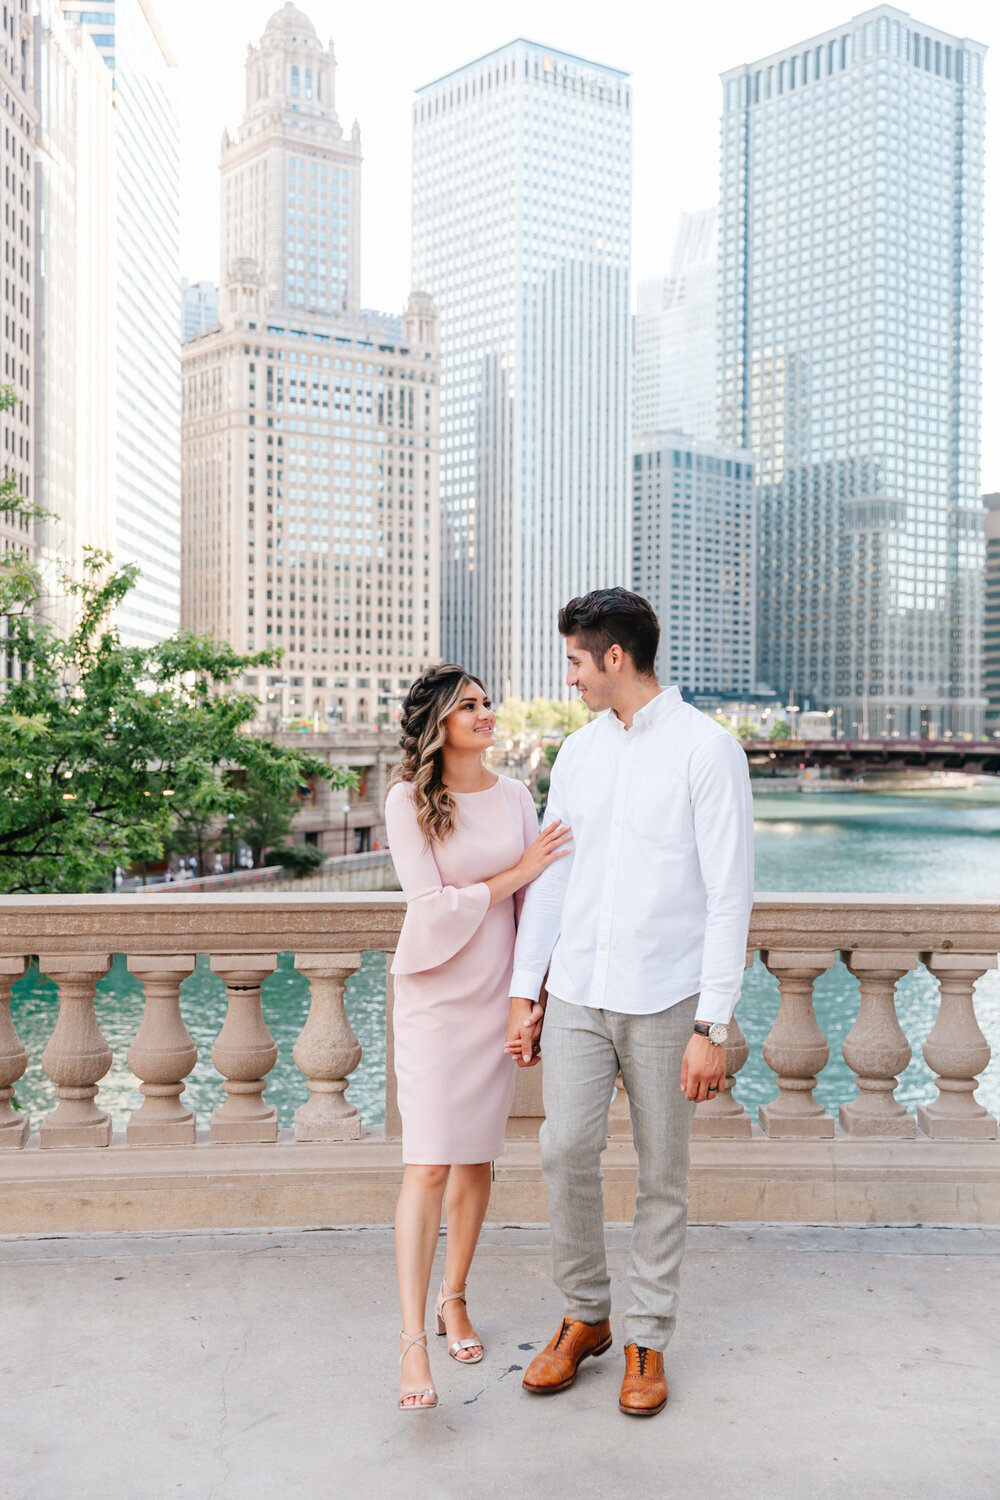 Chicago+city+skyline+engagment+session+photography.jpg